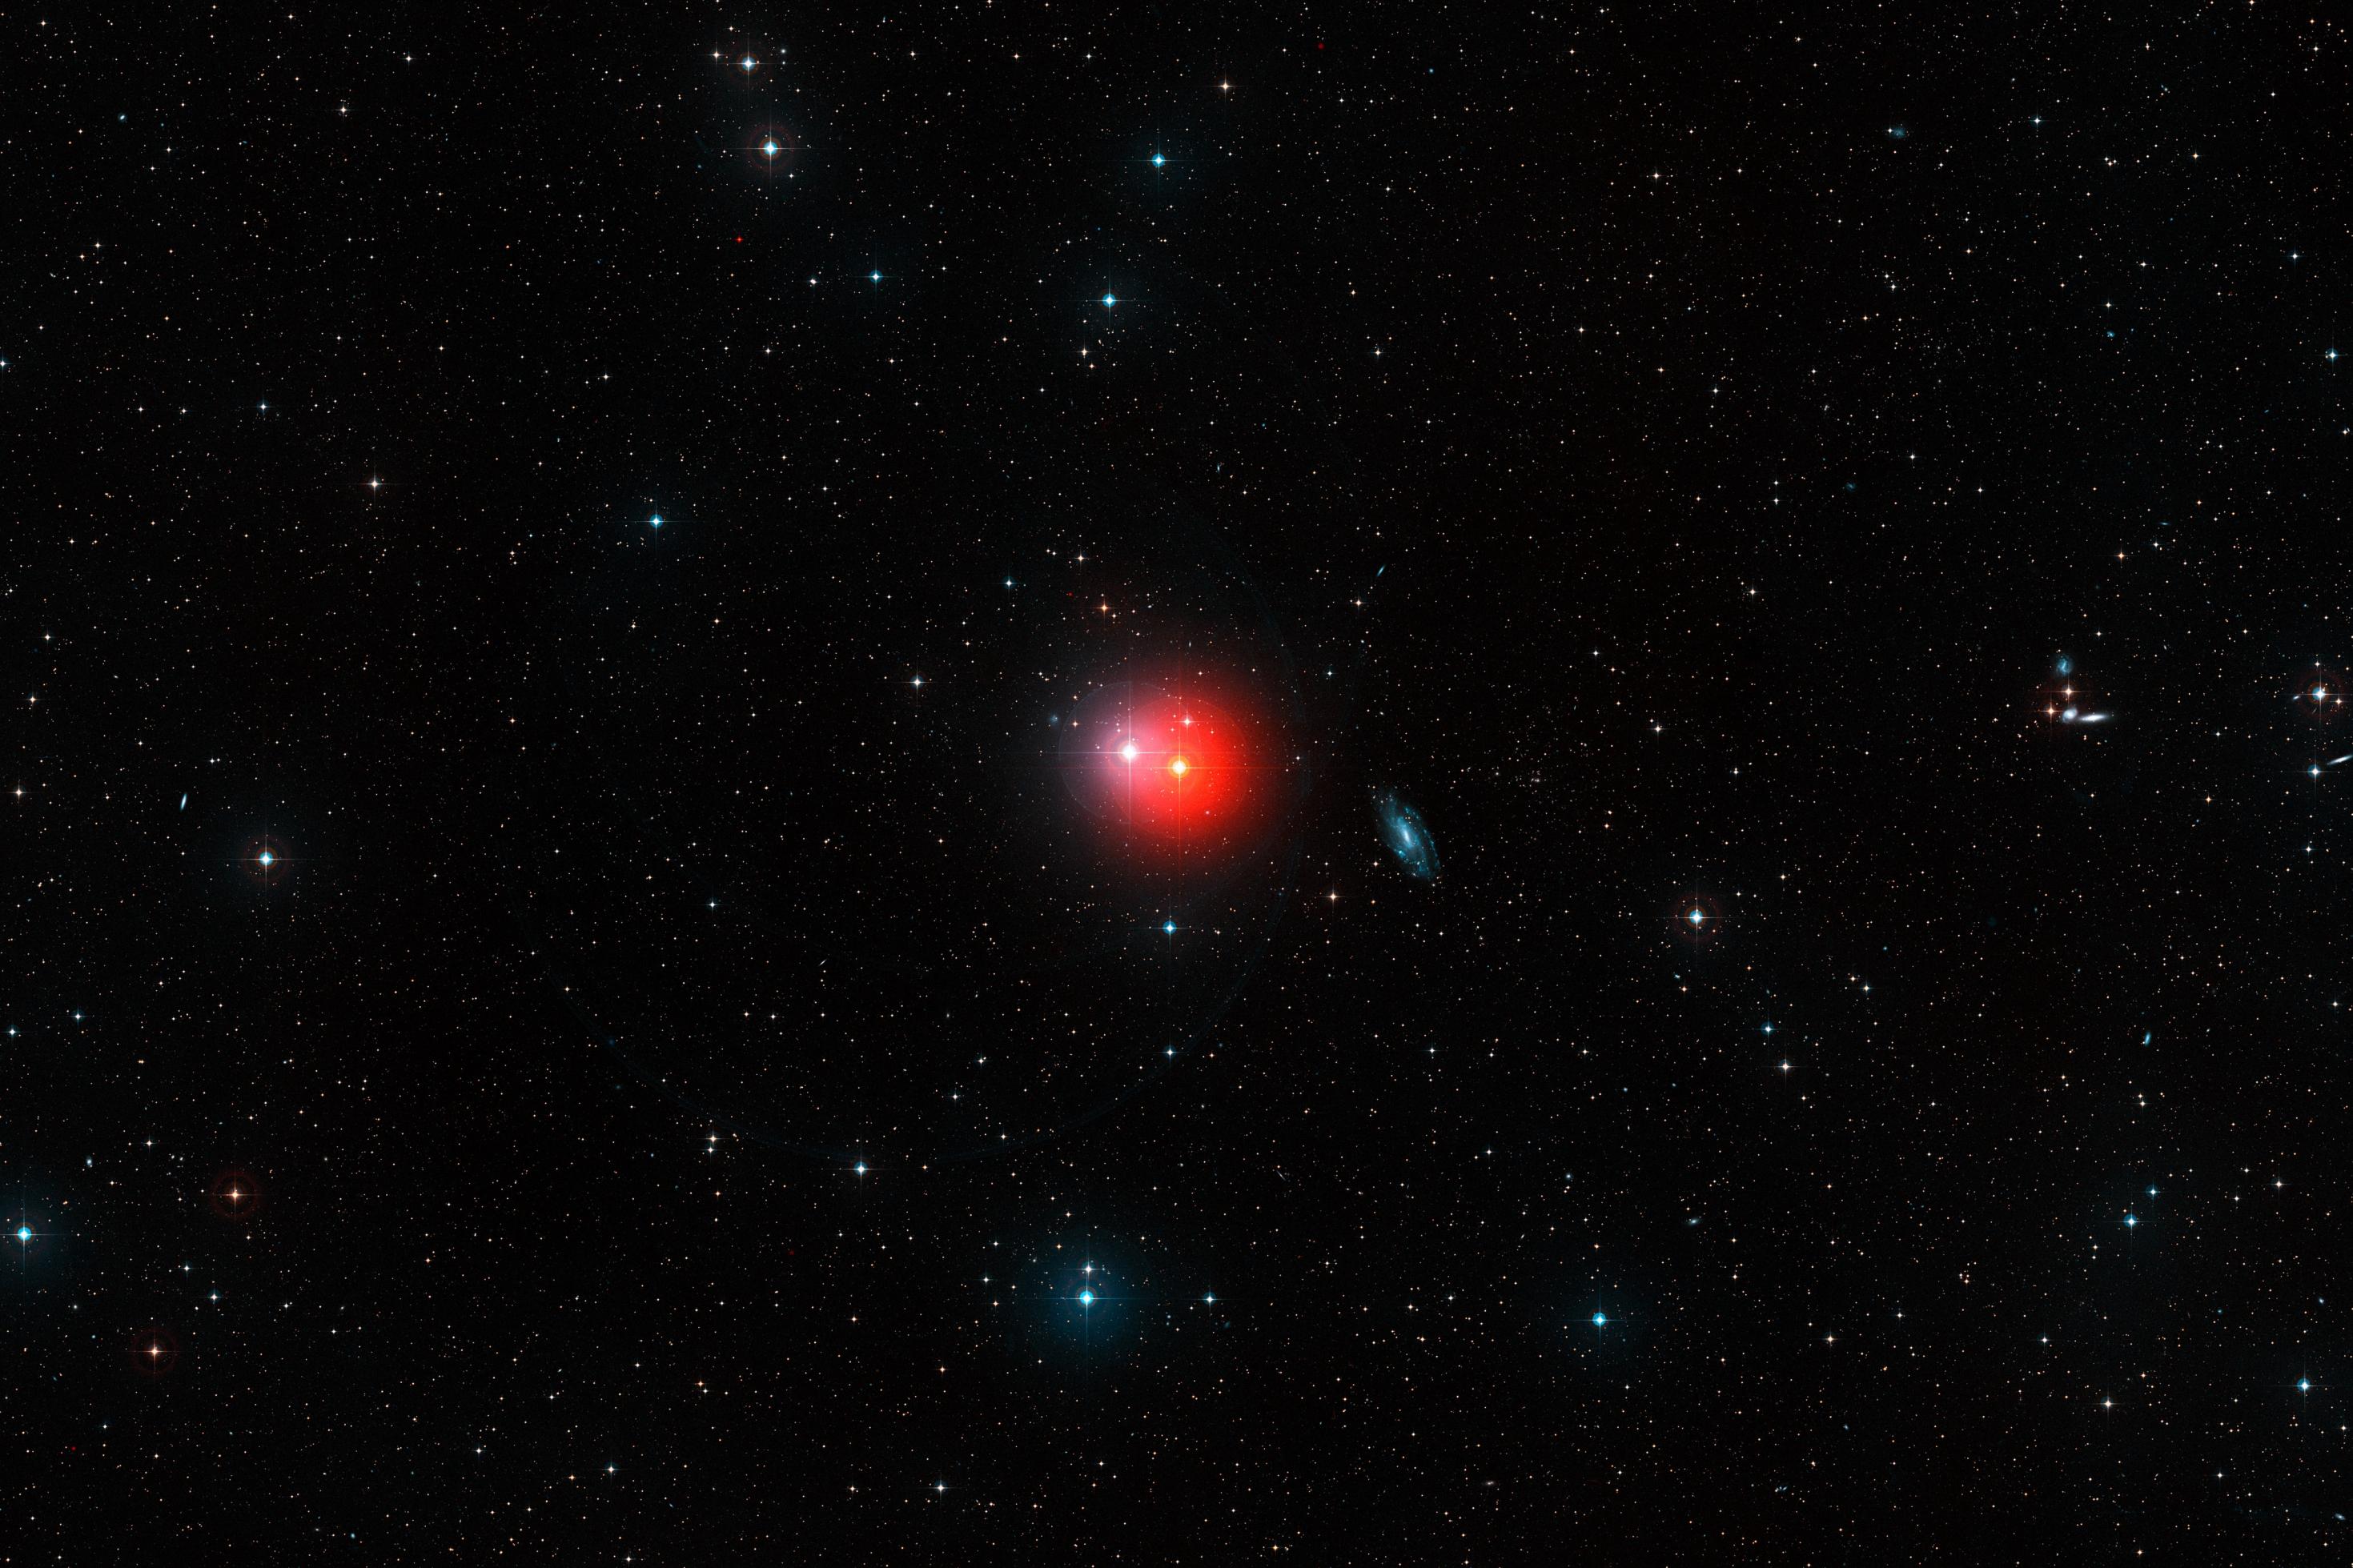 This colourful image shows the sky around the bright pair of stars ?1 Gruis (centre-right, very red) and ?2 Gruis (centre-left, bluish-white). Just right of centre the bright spiral galaxy IC 5201 is also visible and many other fainter galaxies are scattered across this wide-field image from the Digitized Sky Survey 2.